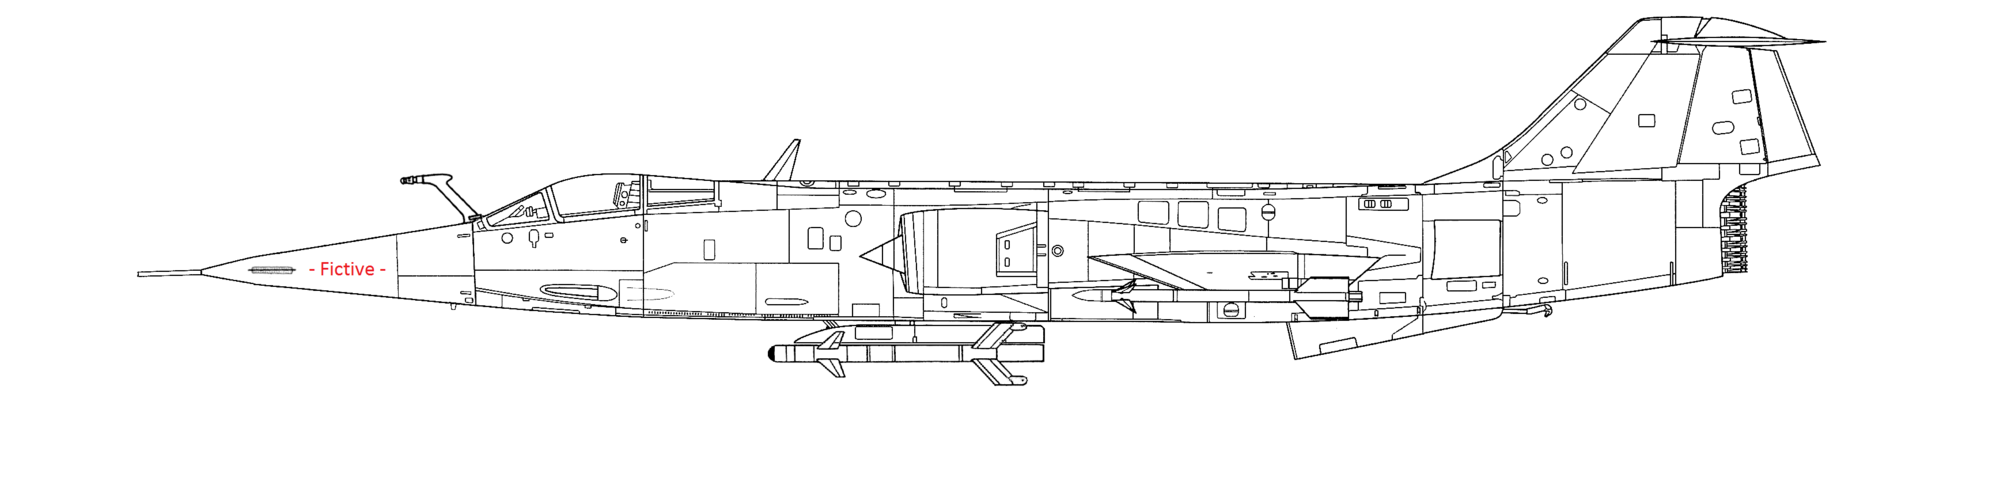 F-104 Starfighter modernised.png